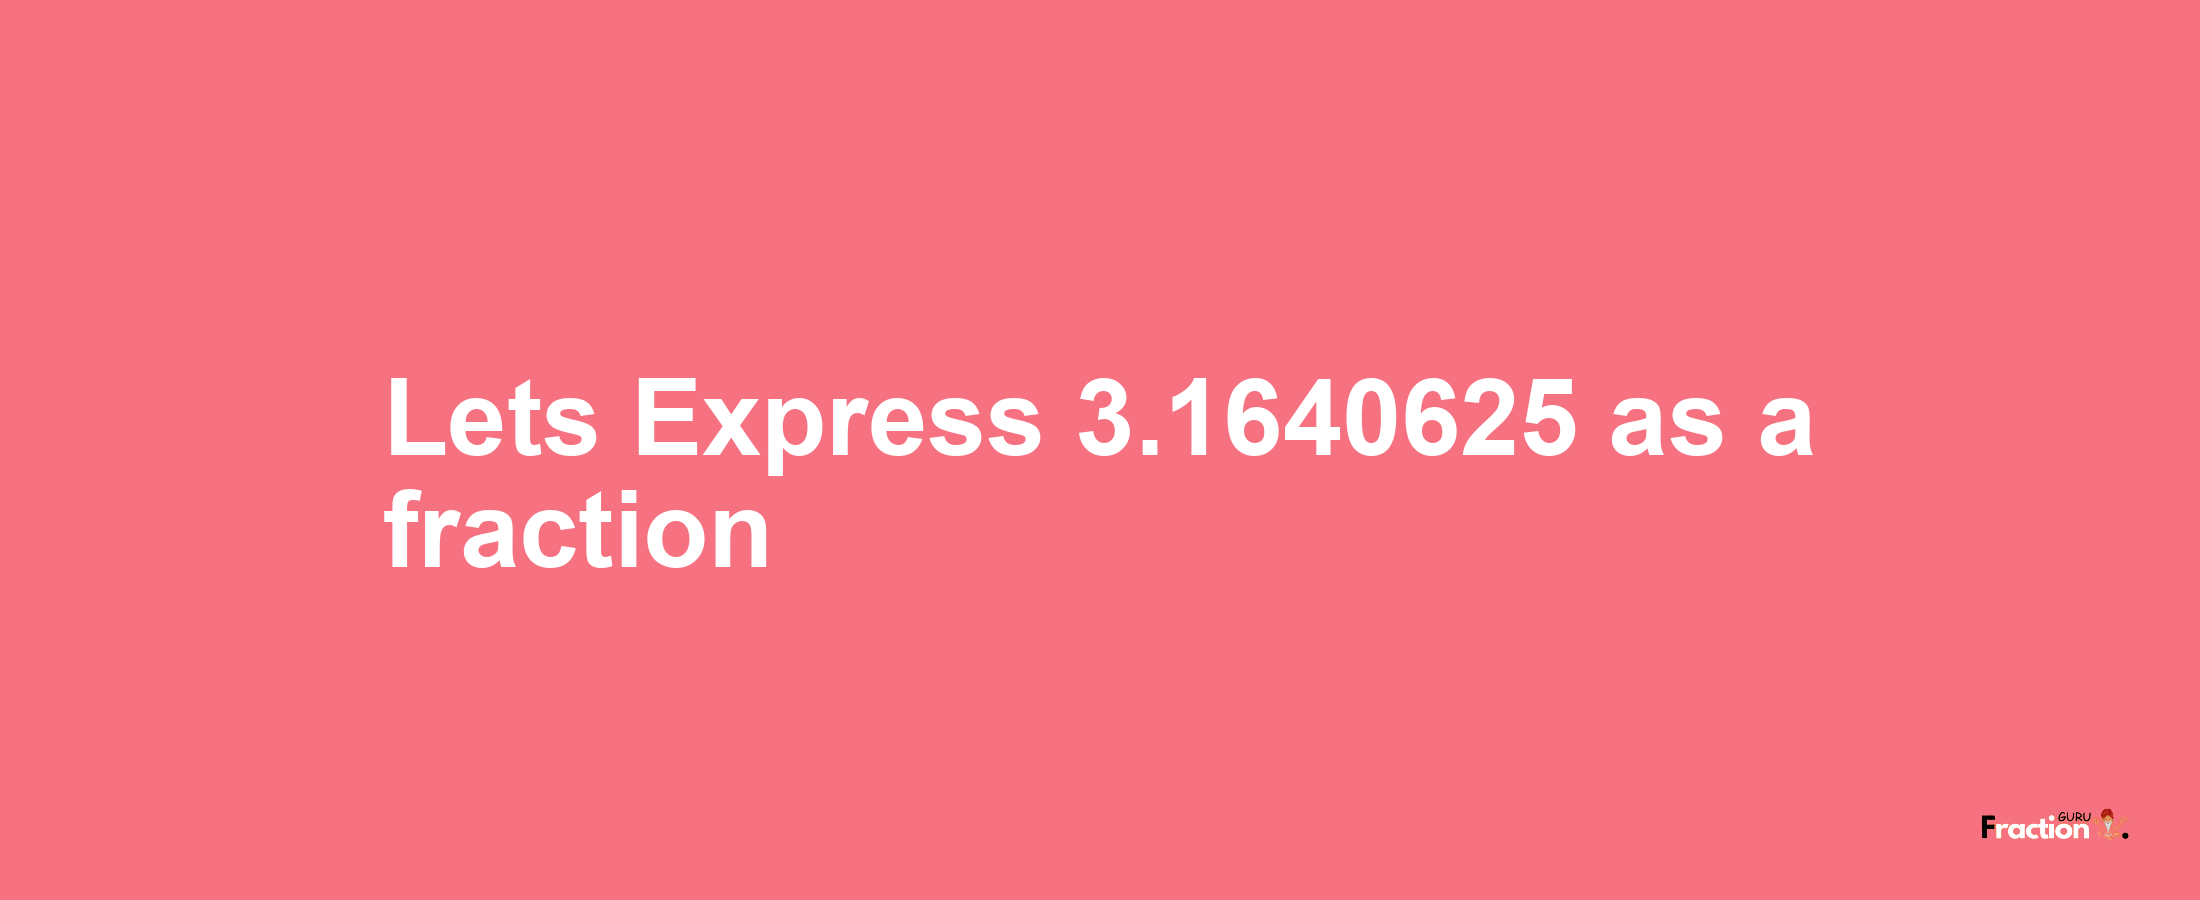 Lets Express 3.1640625 as afraction